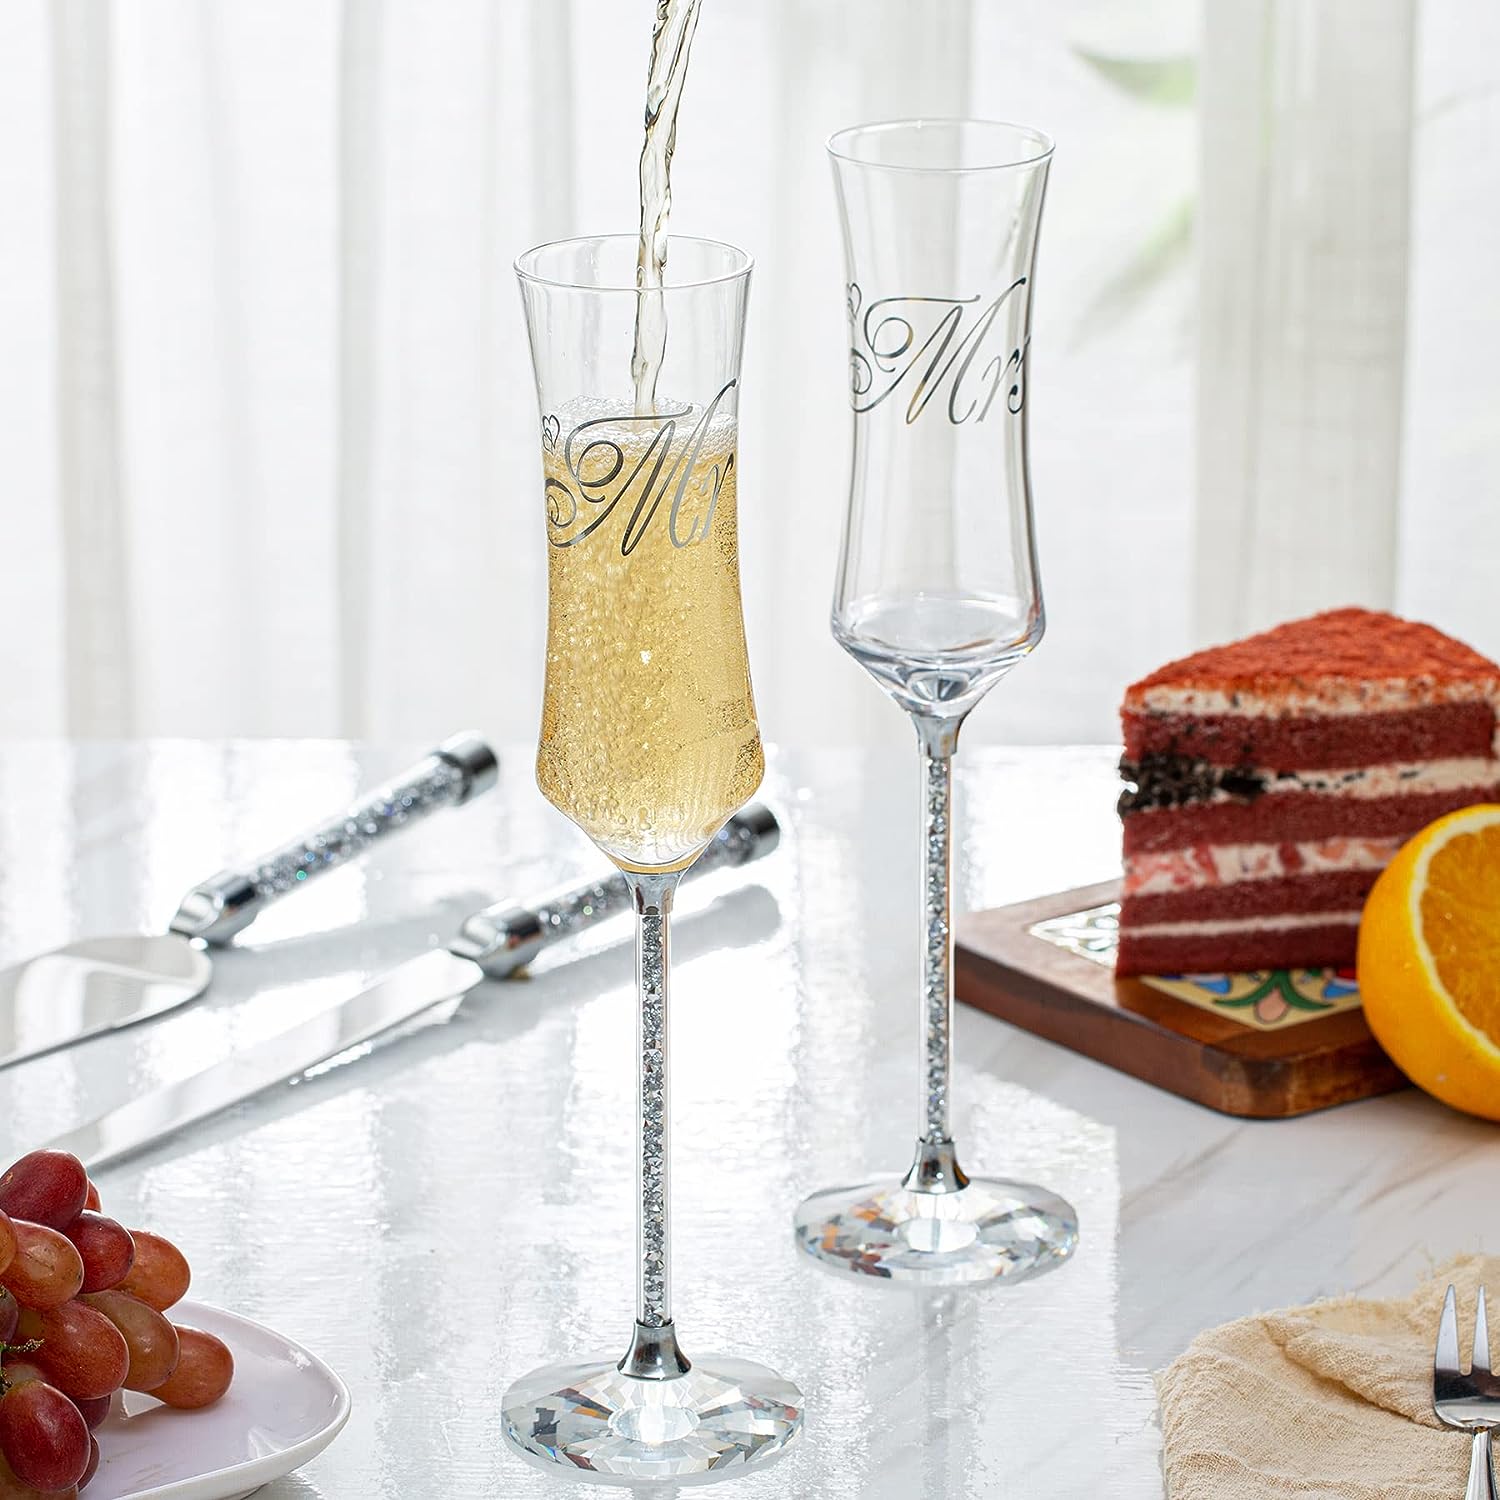 VARLKA Mr and Mrs Champagne Flutes, 7oz Square Bride and Groom Wedding  Toasting Glass, Wine Glasses …See more VARLKA Mr and Mrs Champagne Flutes,  7oz